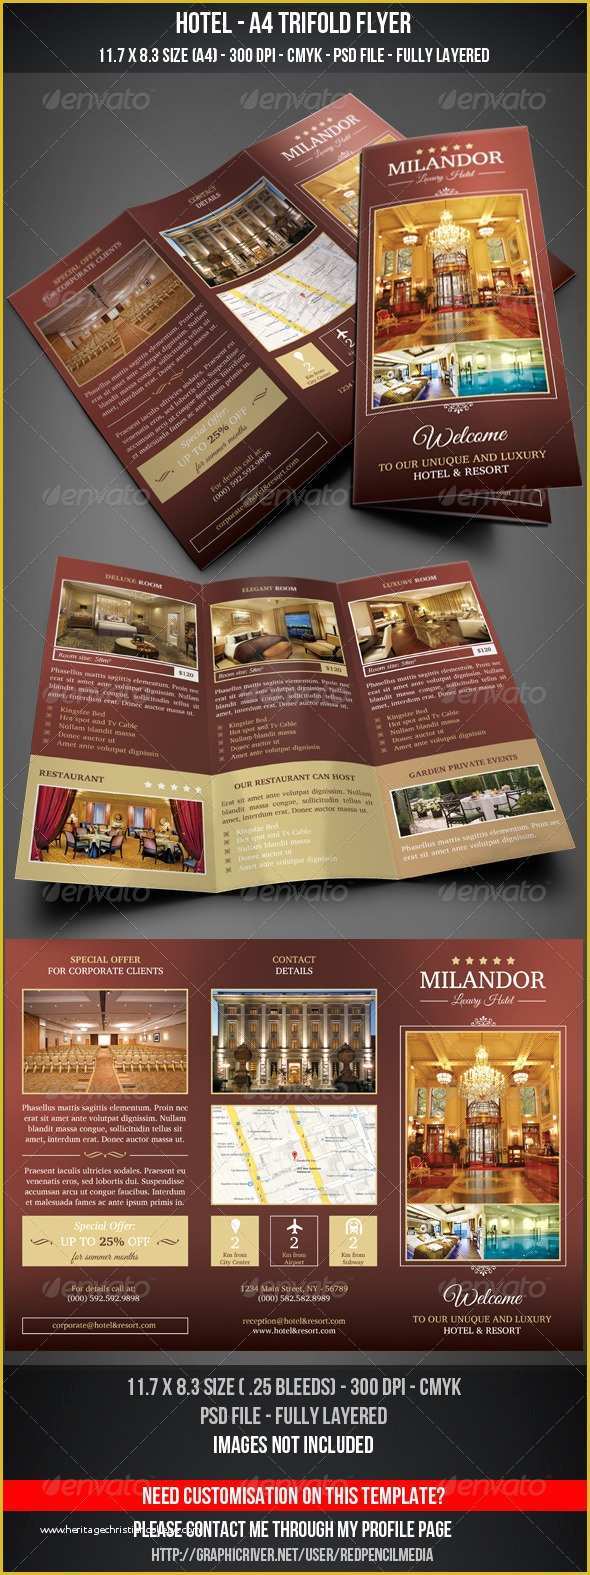 Hotel Flyer Templates Free Download Of Hotel A4 Trifold Flyer by Redpencilmedia